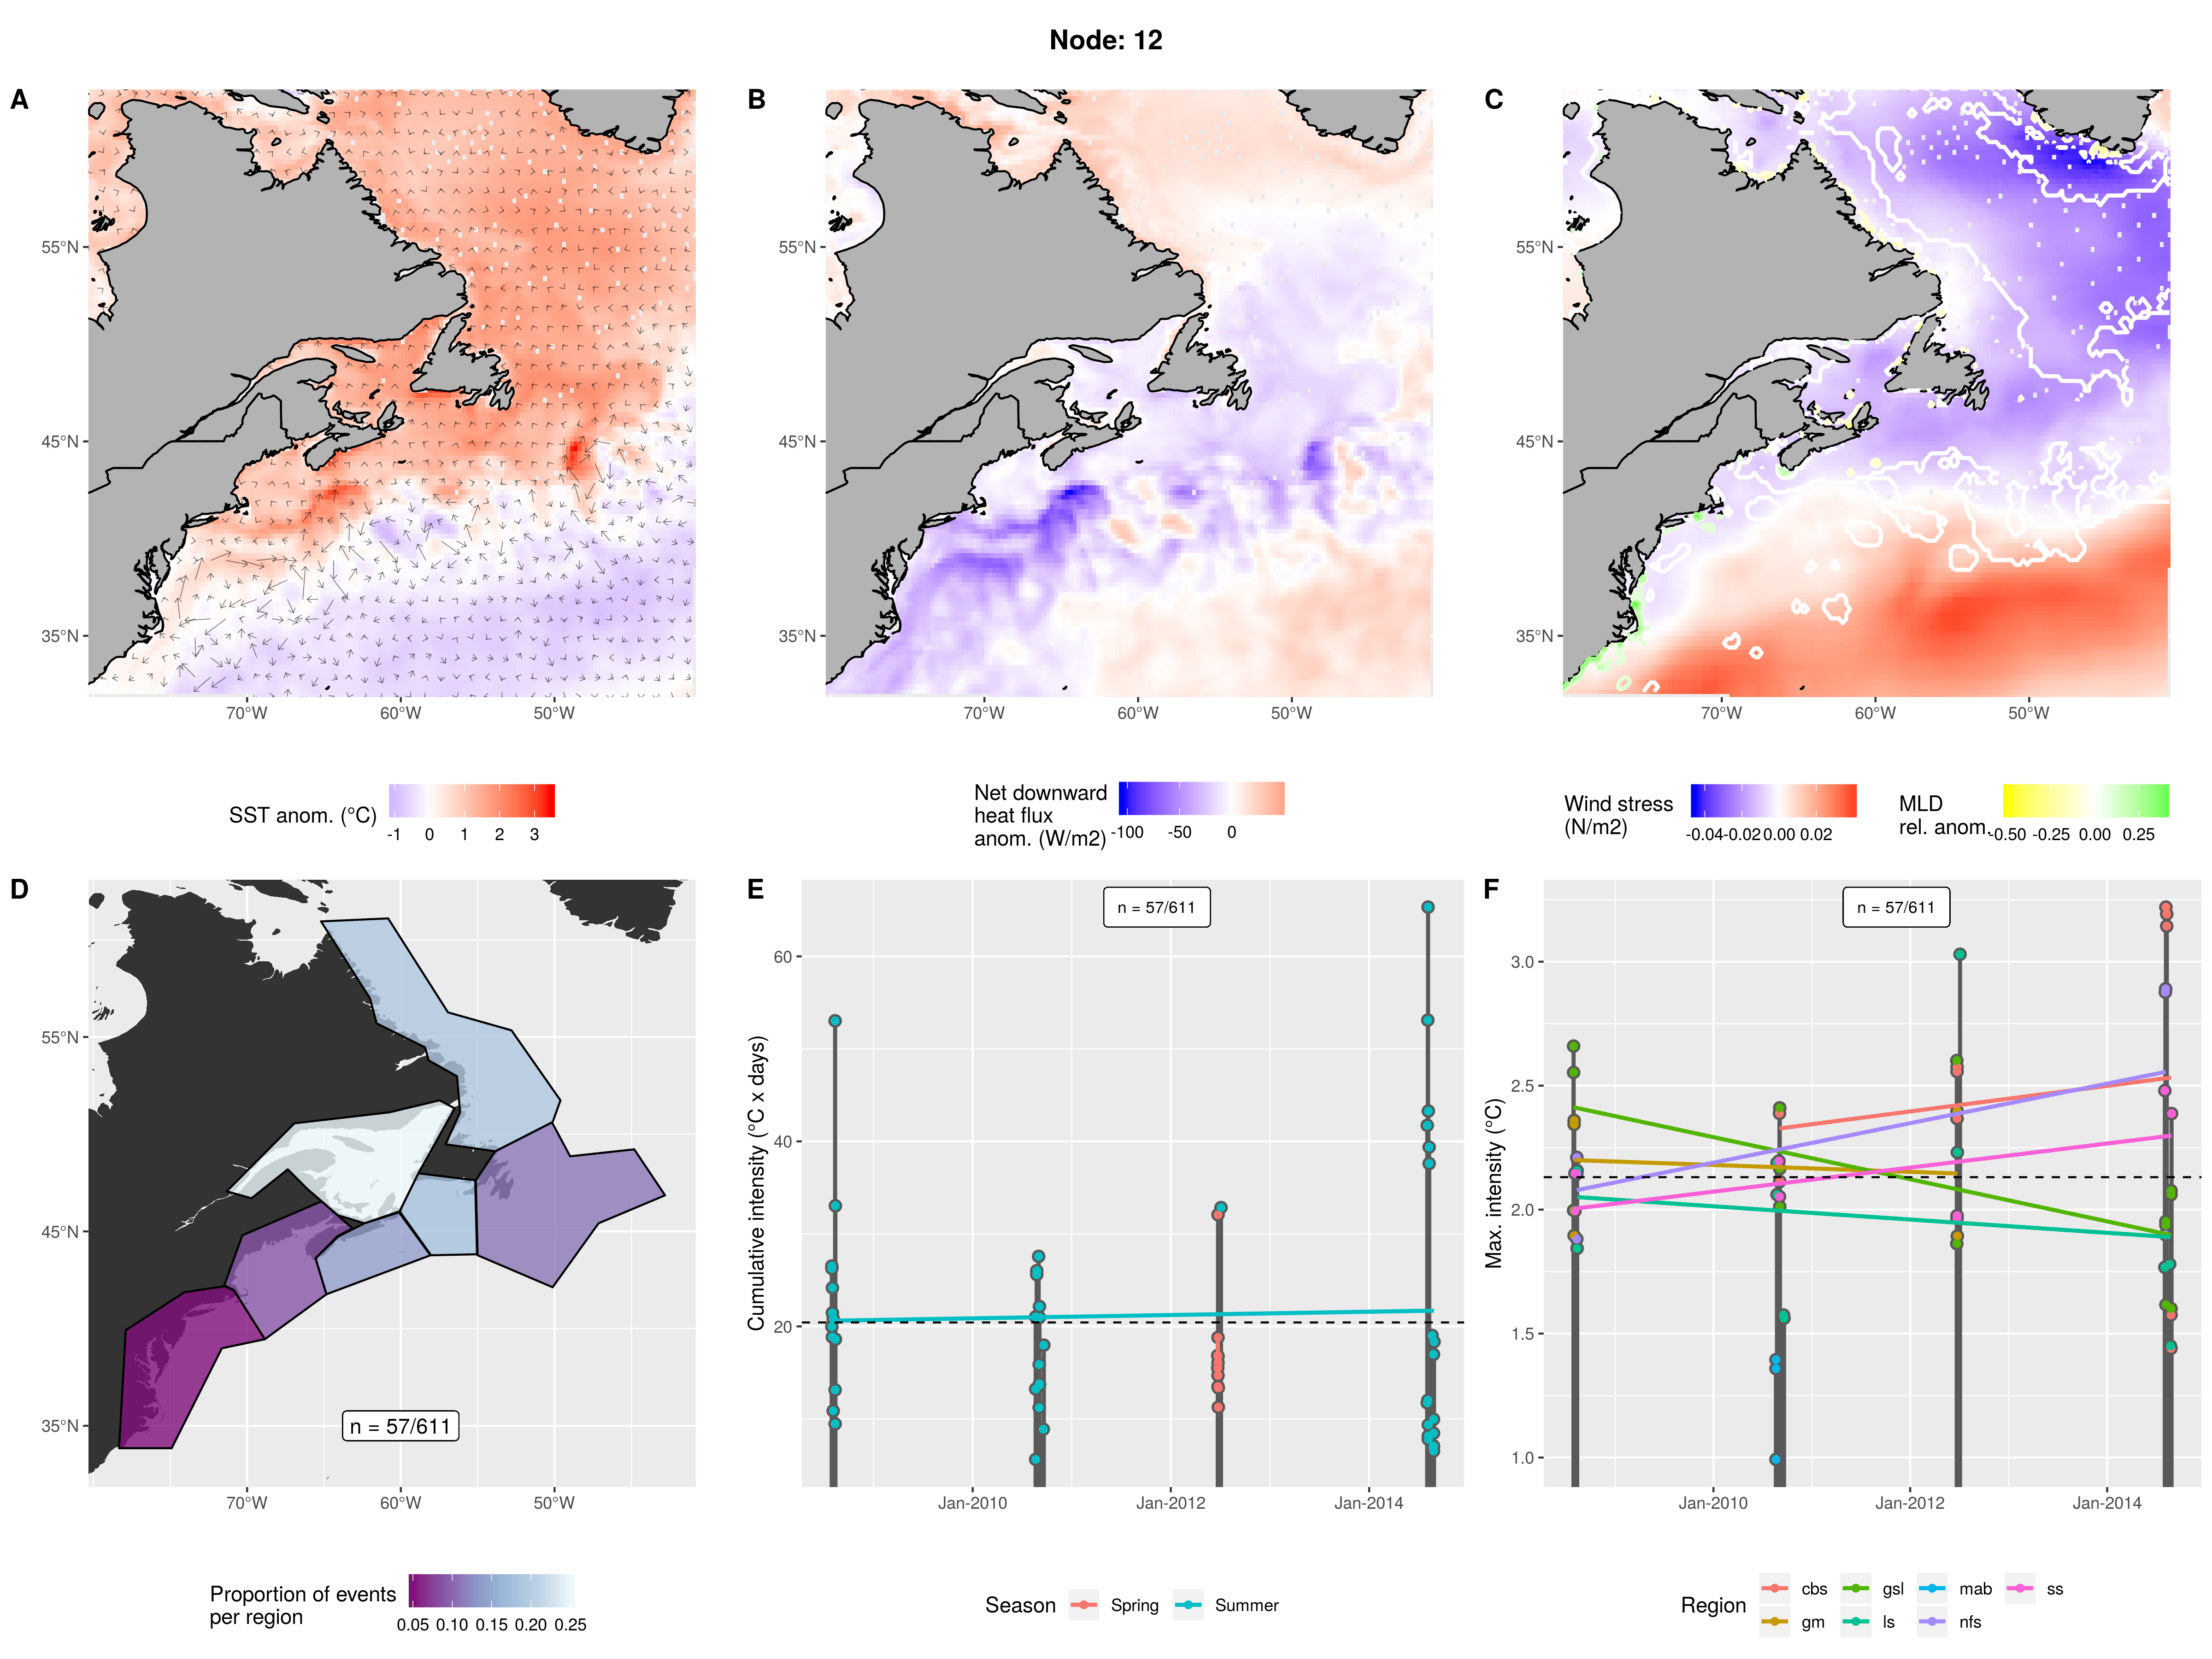 Warm inshore and LS waters with cold GS and AO. GS is moving fast and consistent. Negative heatflux into GS and inshore waters, slightly positive into LS and AO. High wind stress over GS and AO, negative over inshore waters and LS. Very deep mixed layer along coast in mab and very shallow along coast in ls. Mostly events occurring in gsl, but also in other northern areas. Occurred every even year from 2008 to 2014 from ~June - September. Relatively small (short) events but with decent max intensities.